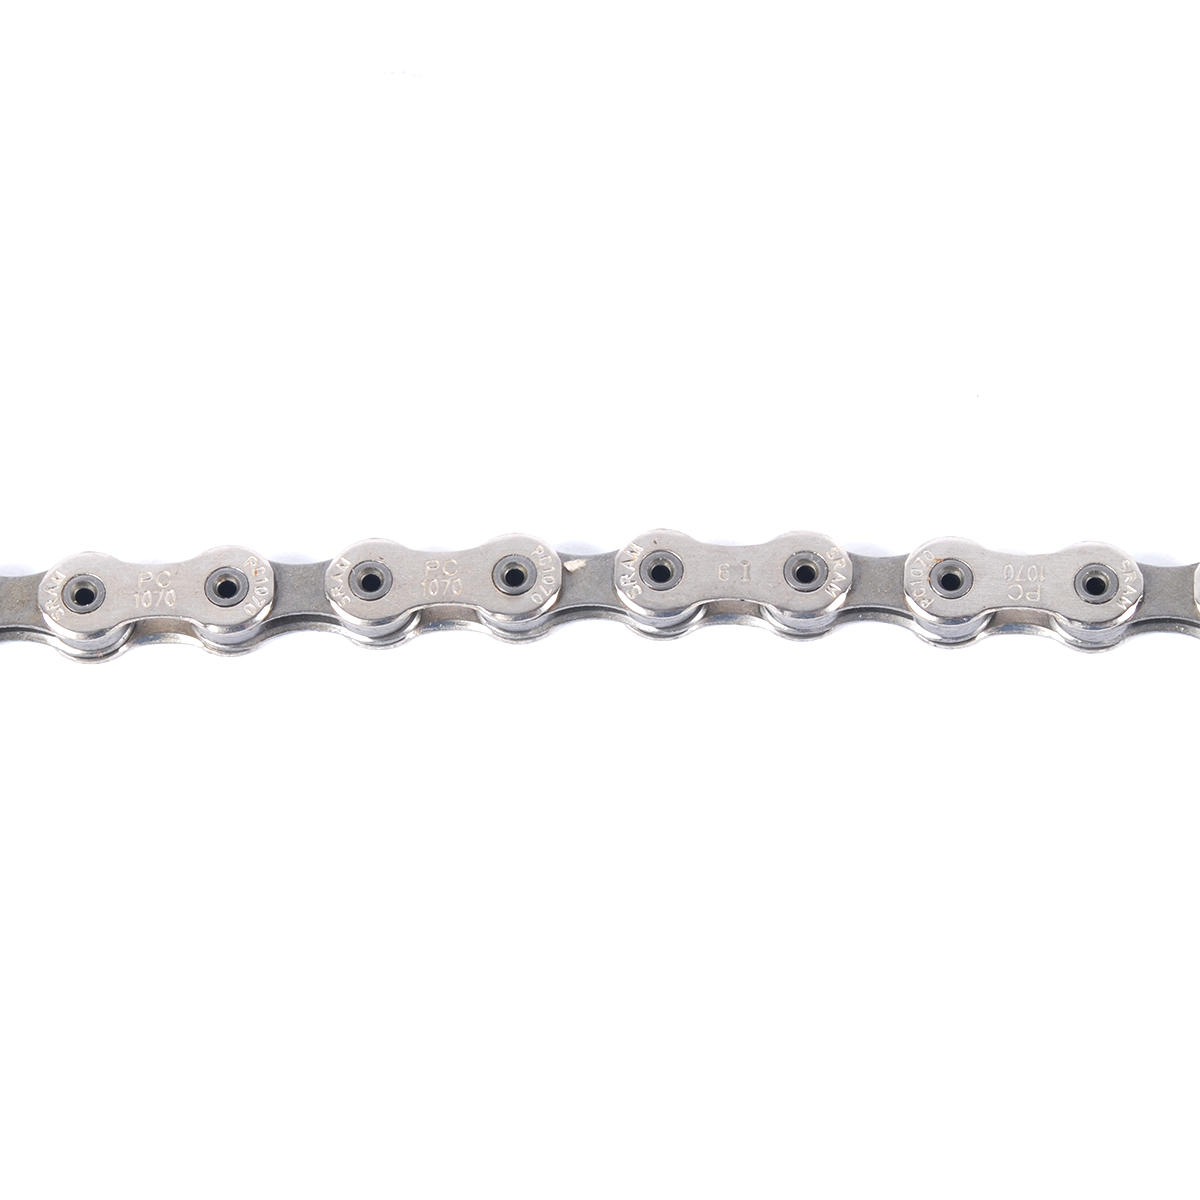 SRAM Pc-1070 Bicycle Chain Silver 10 Speed 114 Link